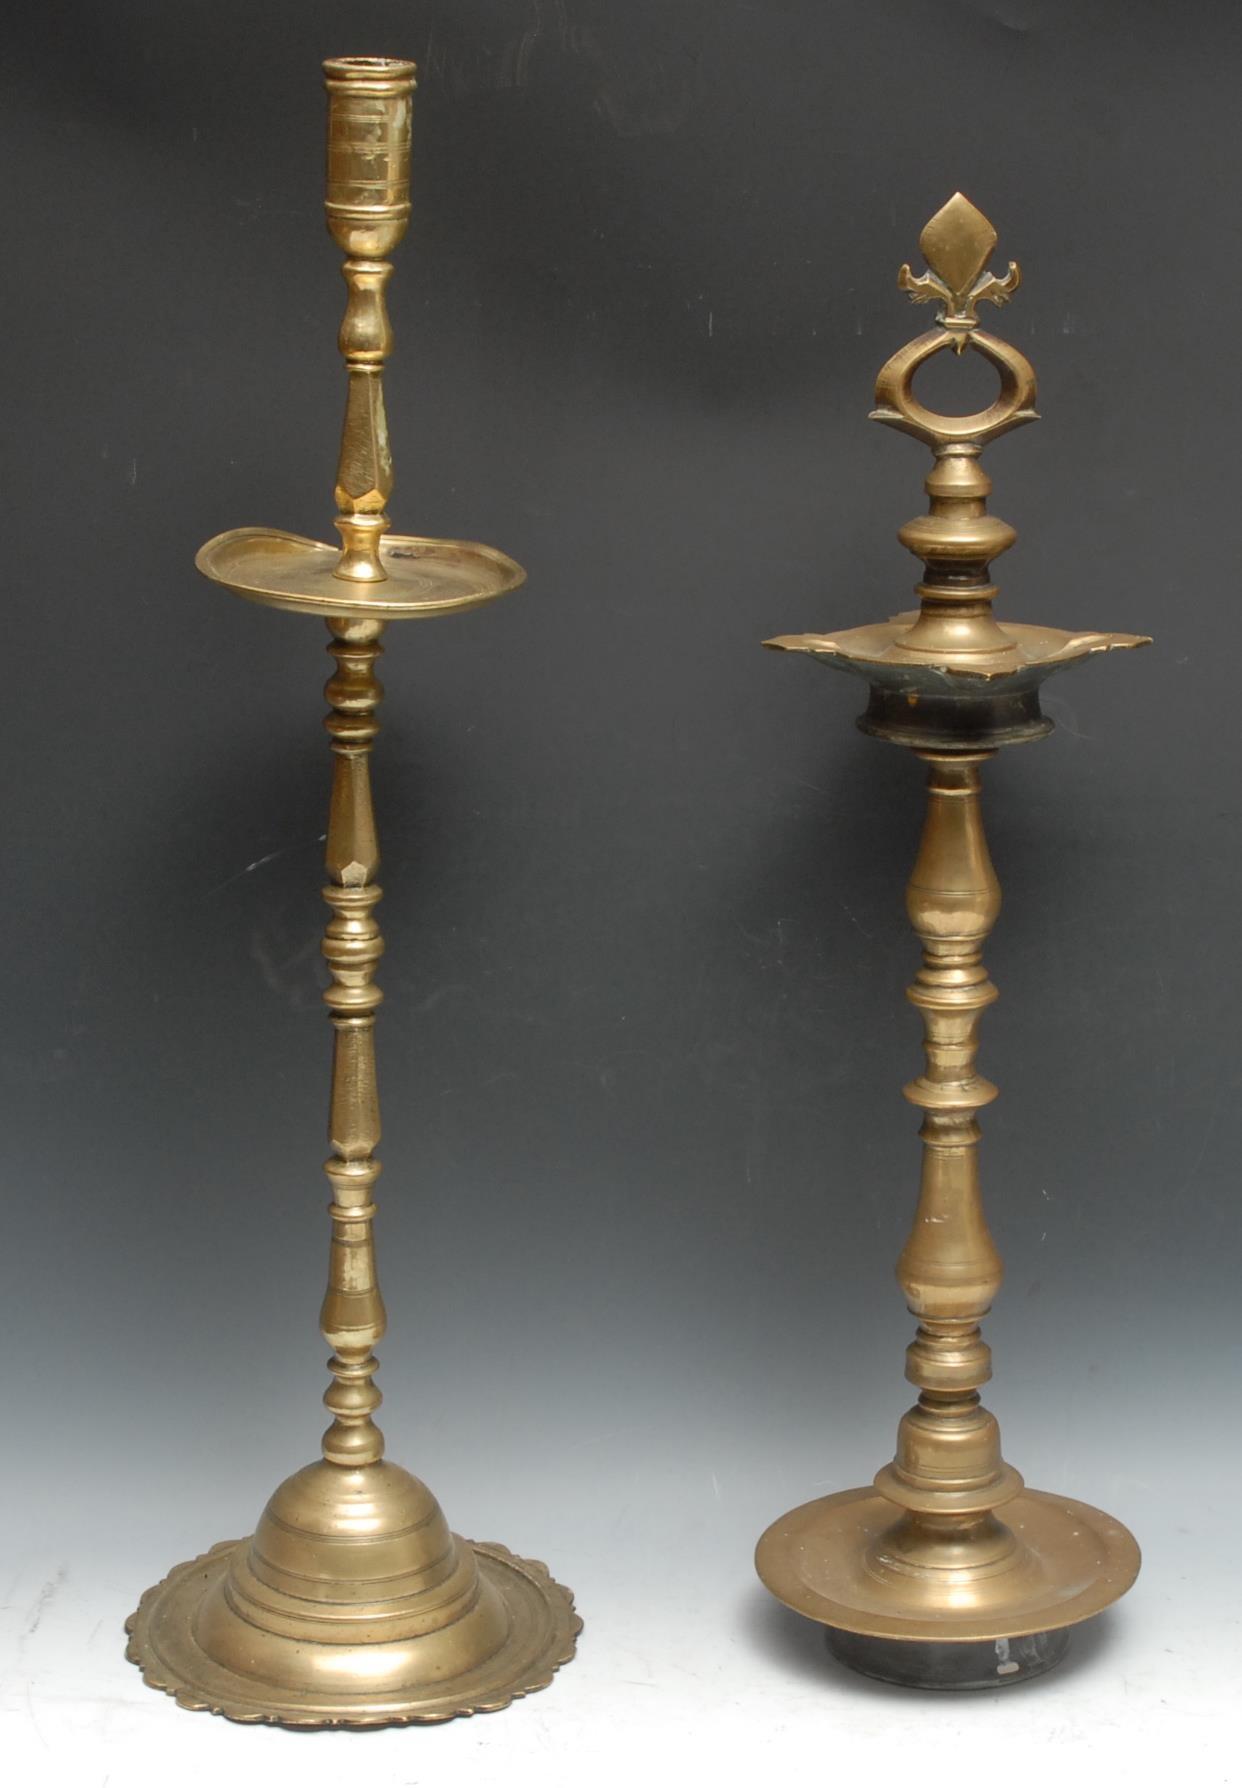 A large Indian brass candlestick, cylindrical sconce above a broad drip pan, domed lotus shaped